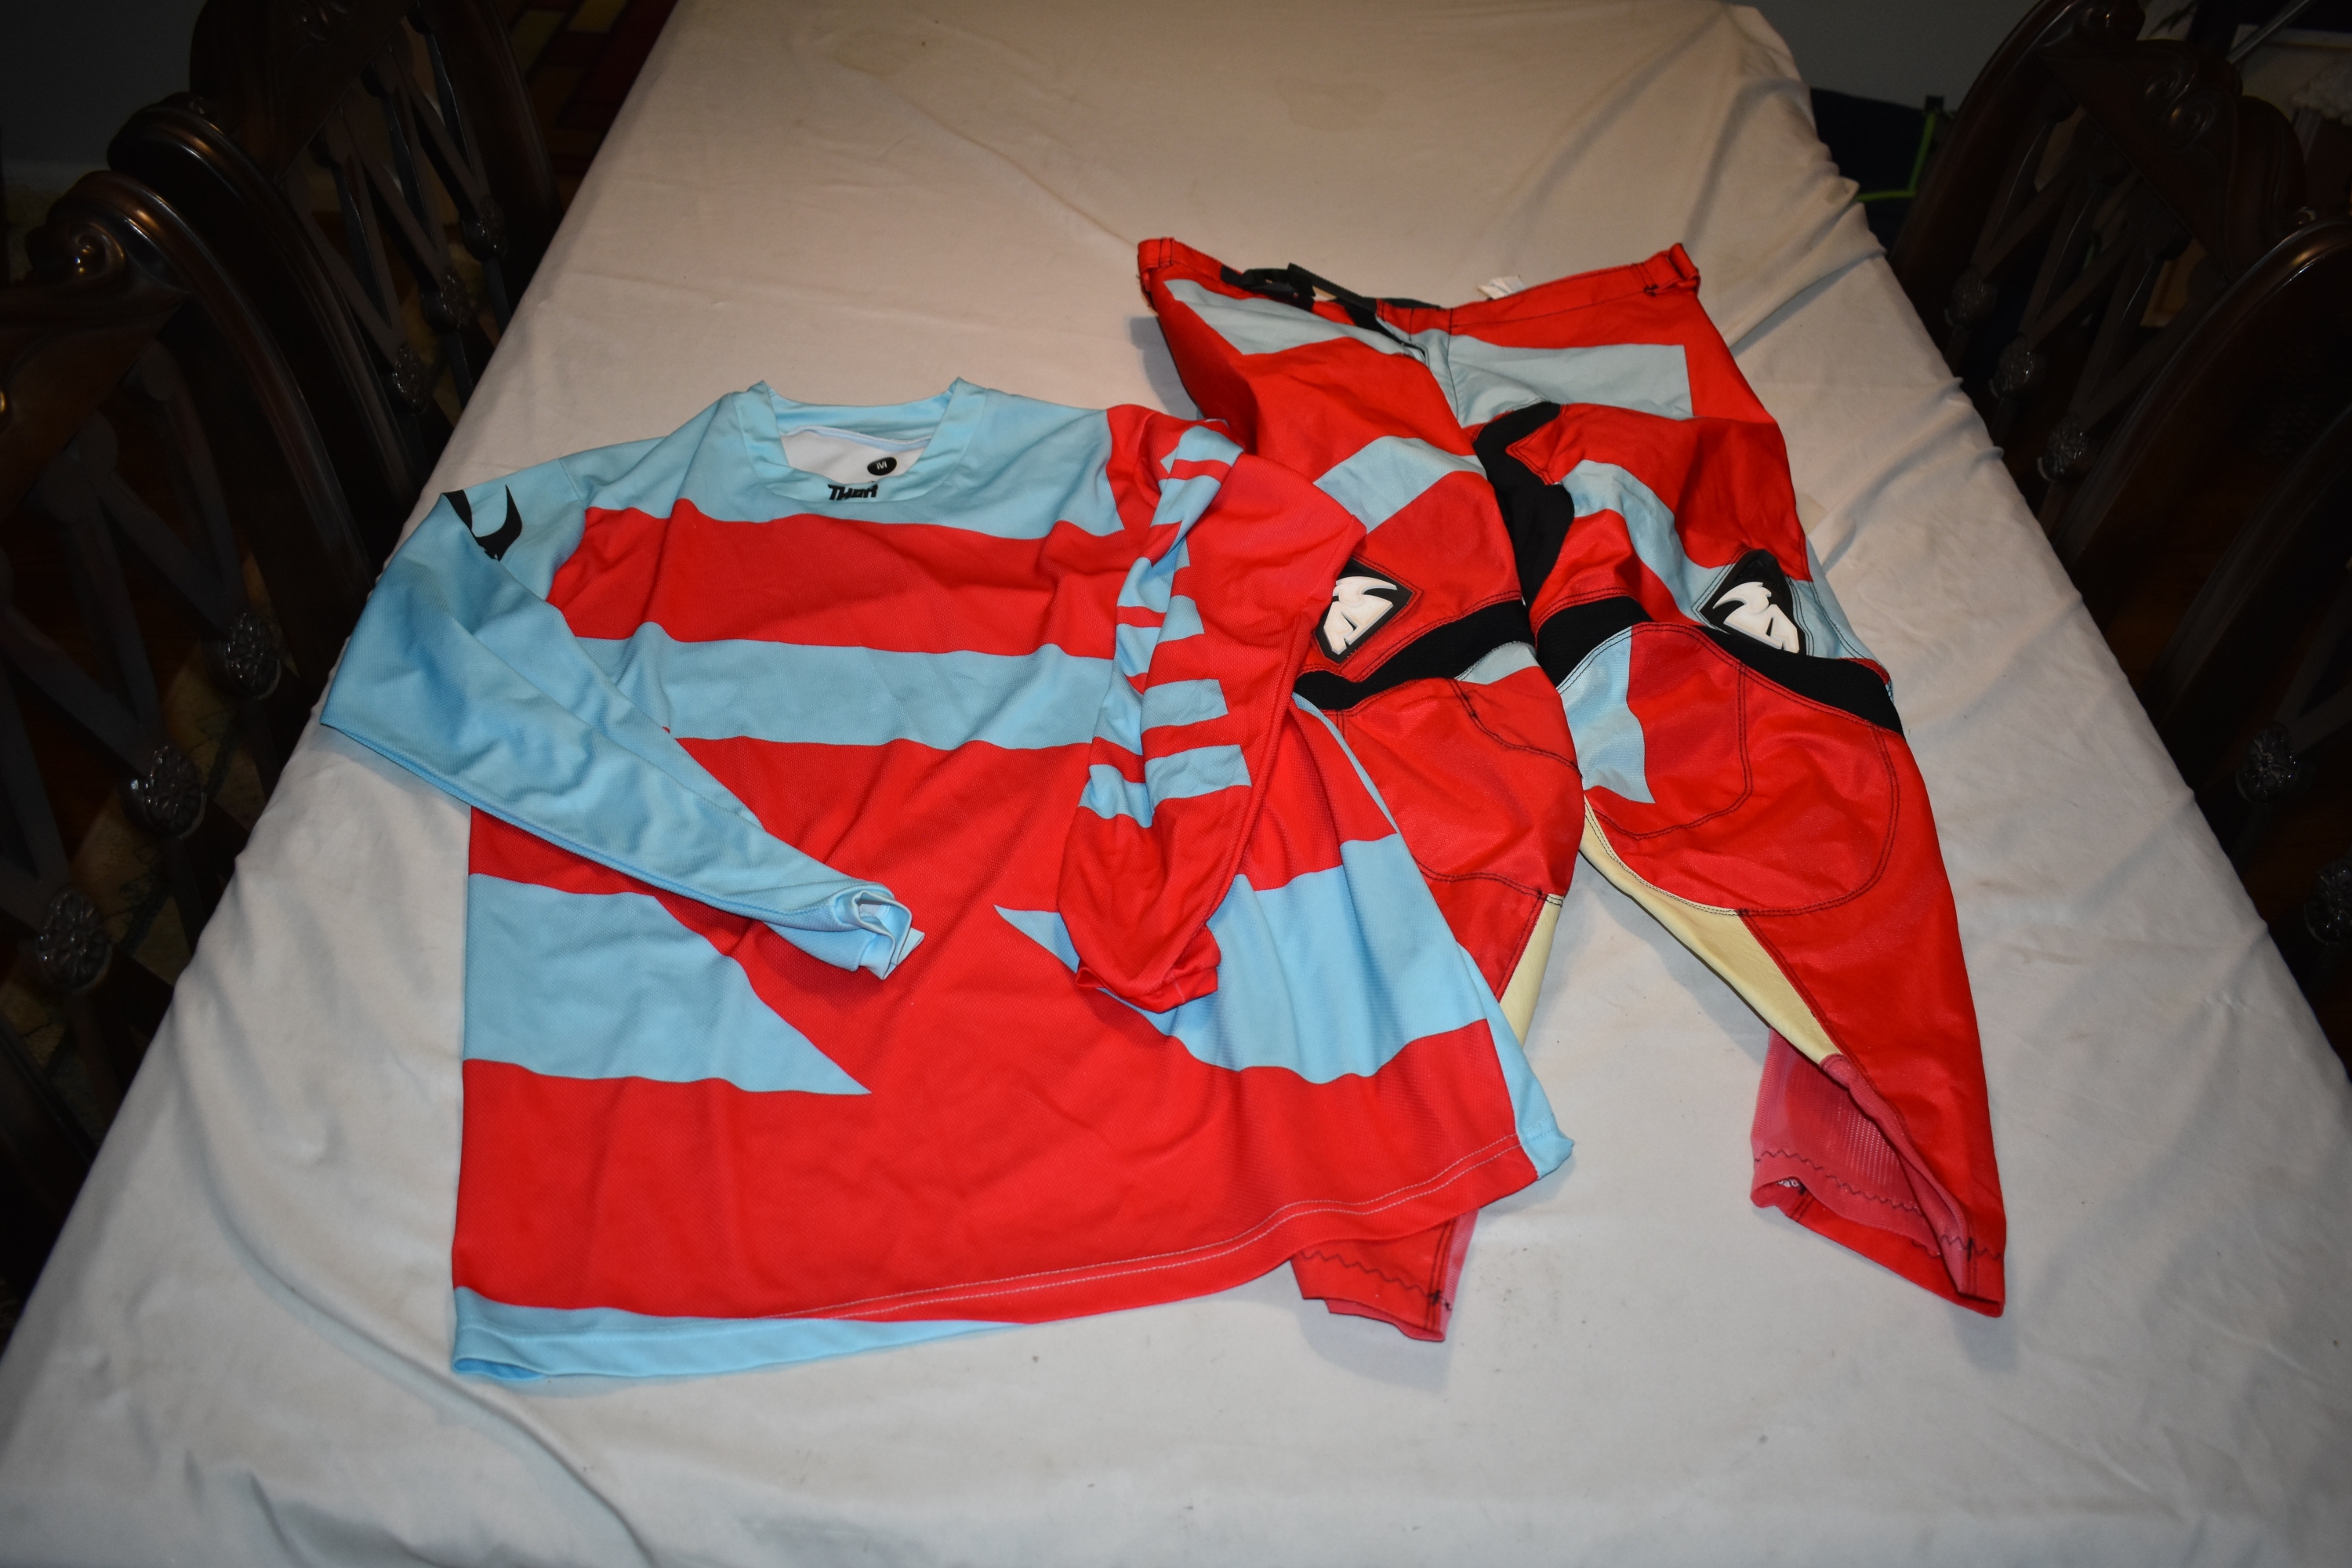 Thor Motocross Jersey/Pants Set, Blue/Red, Size 34/Medium - Great Condition!